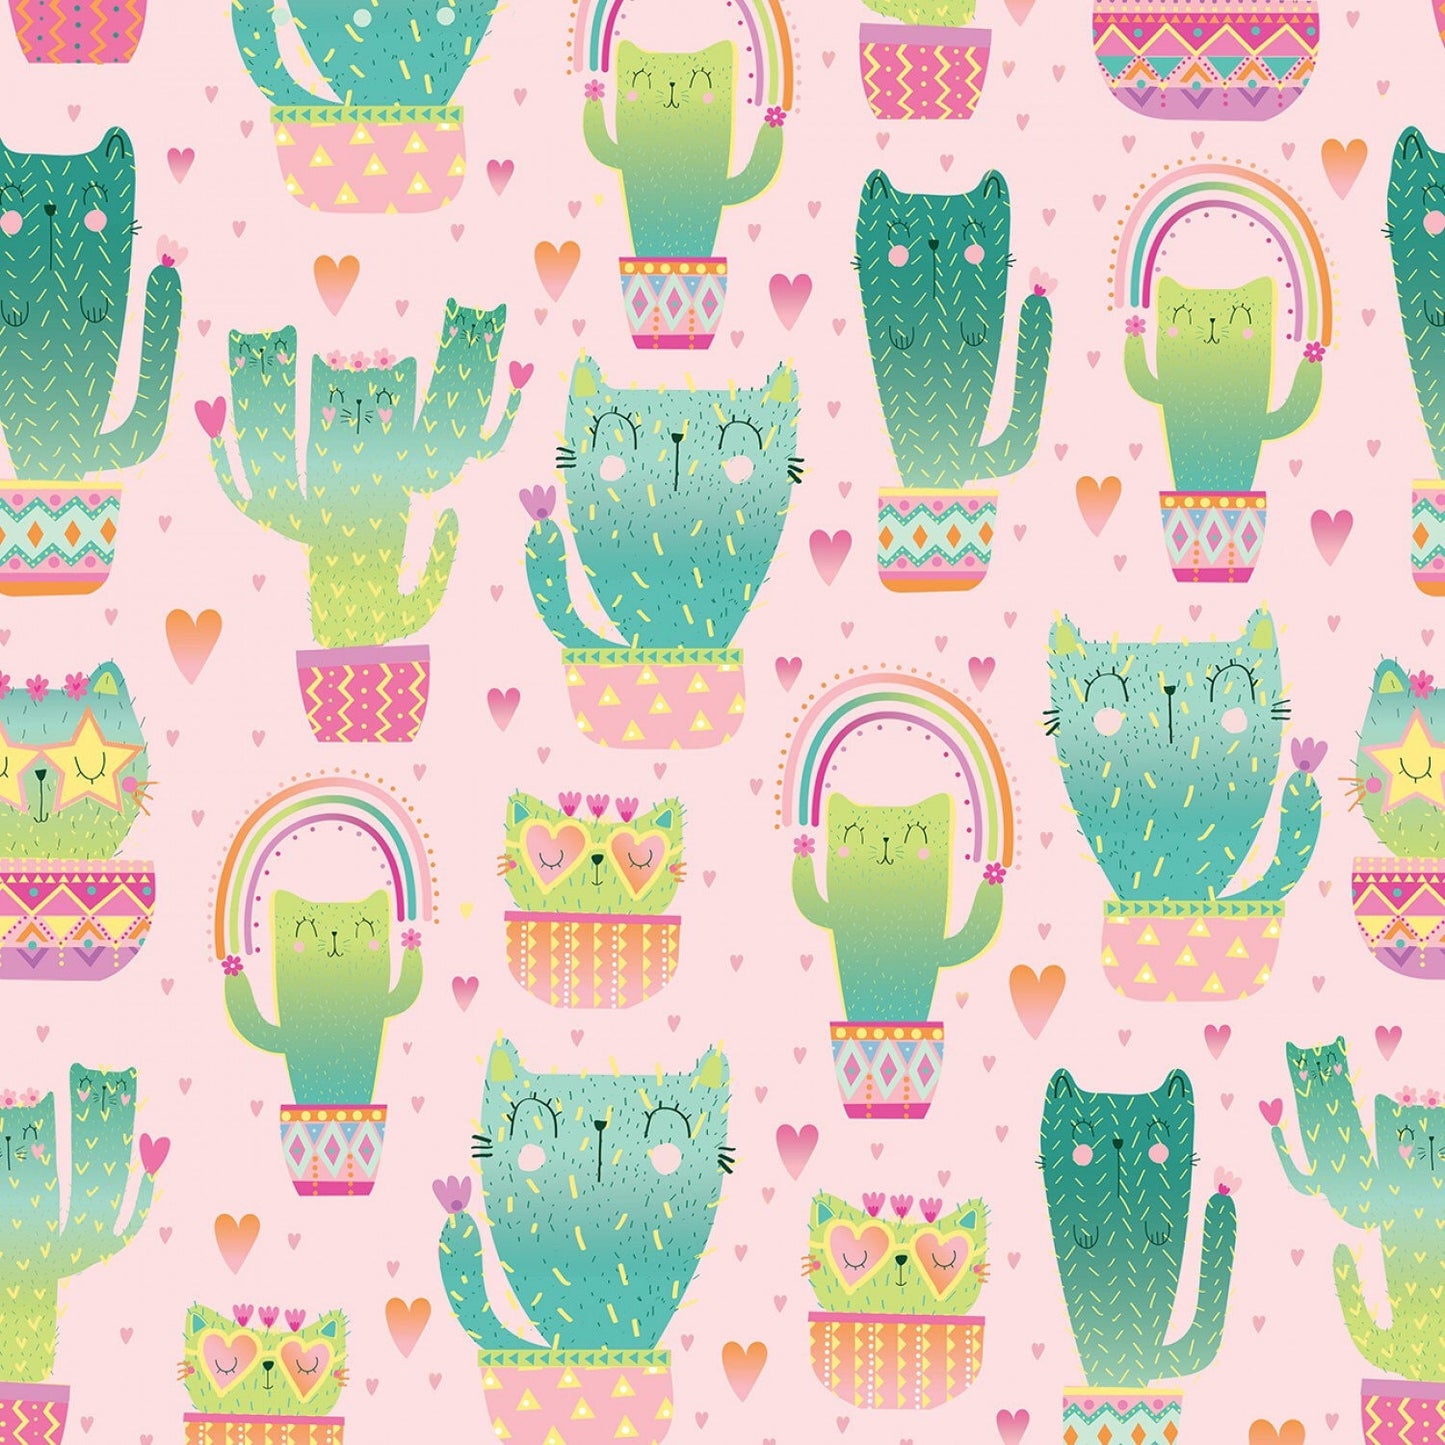 Kitty Cactus Fabric - By The Half Yard - BTHY - Cat Fabric - Succulent Fabric - Cactus Fabric - Timeless Treasures - C8237 PINK